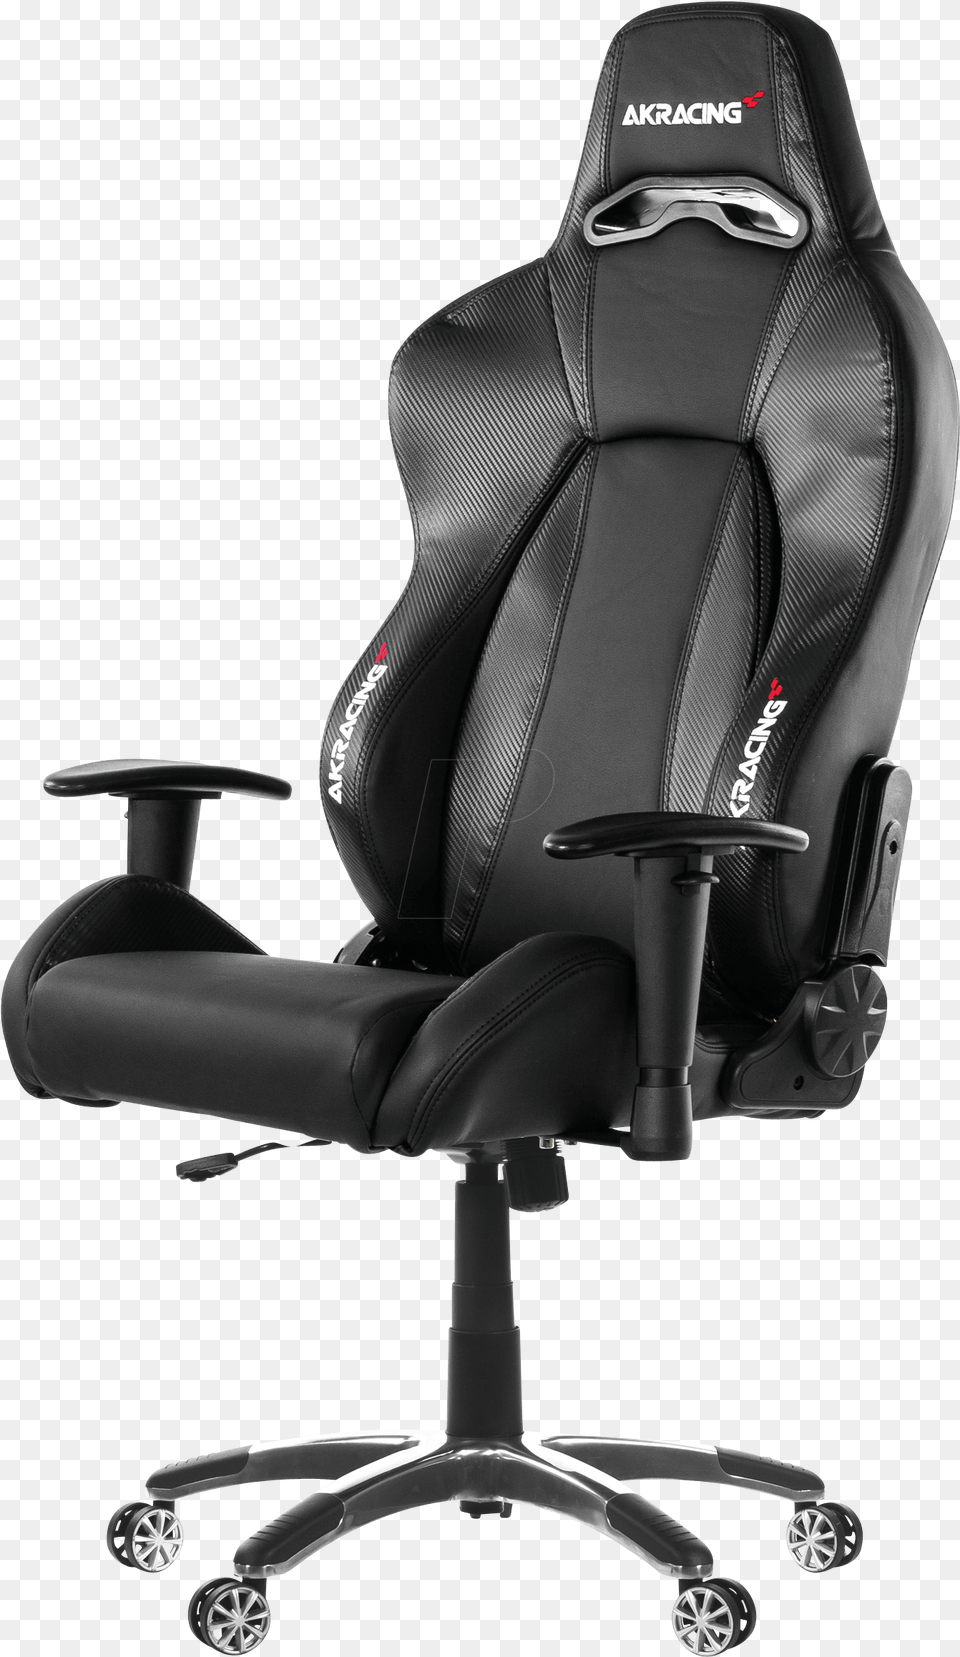 Gaming Chair Ak Racing Premium Gaming Chair, Cushion, Furniture, Home Decor, Headrest Free Png Download